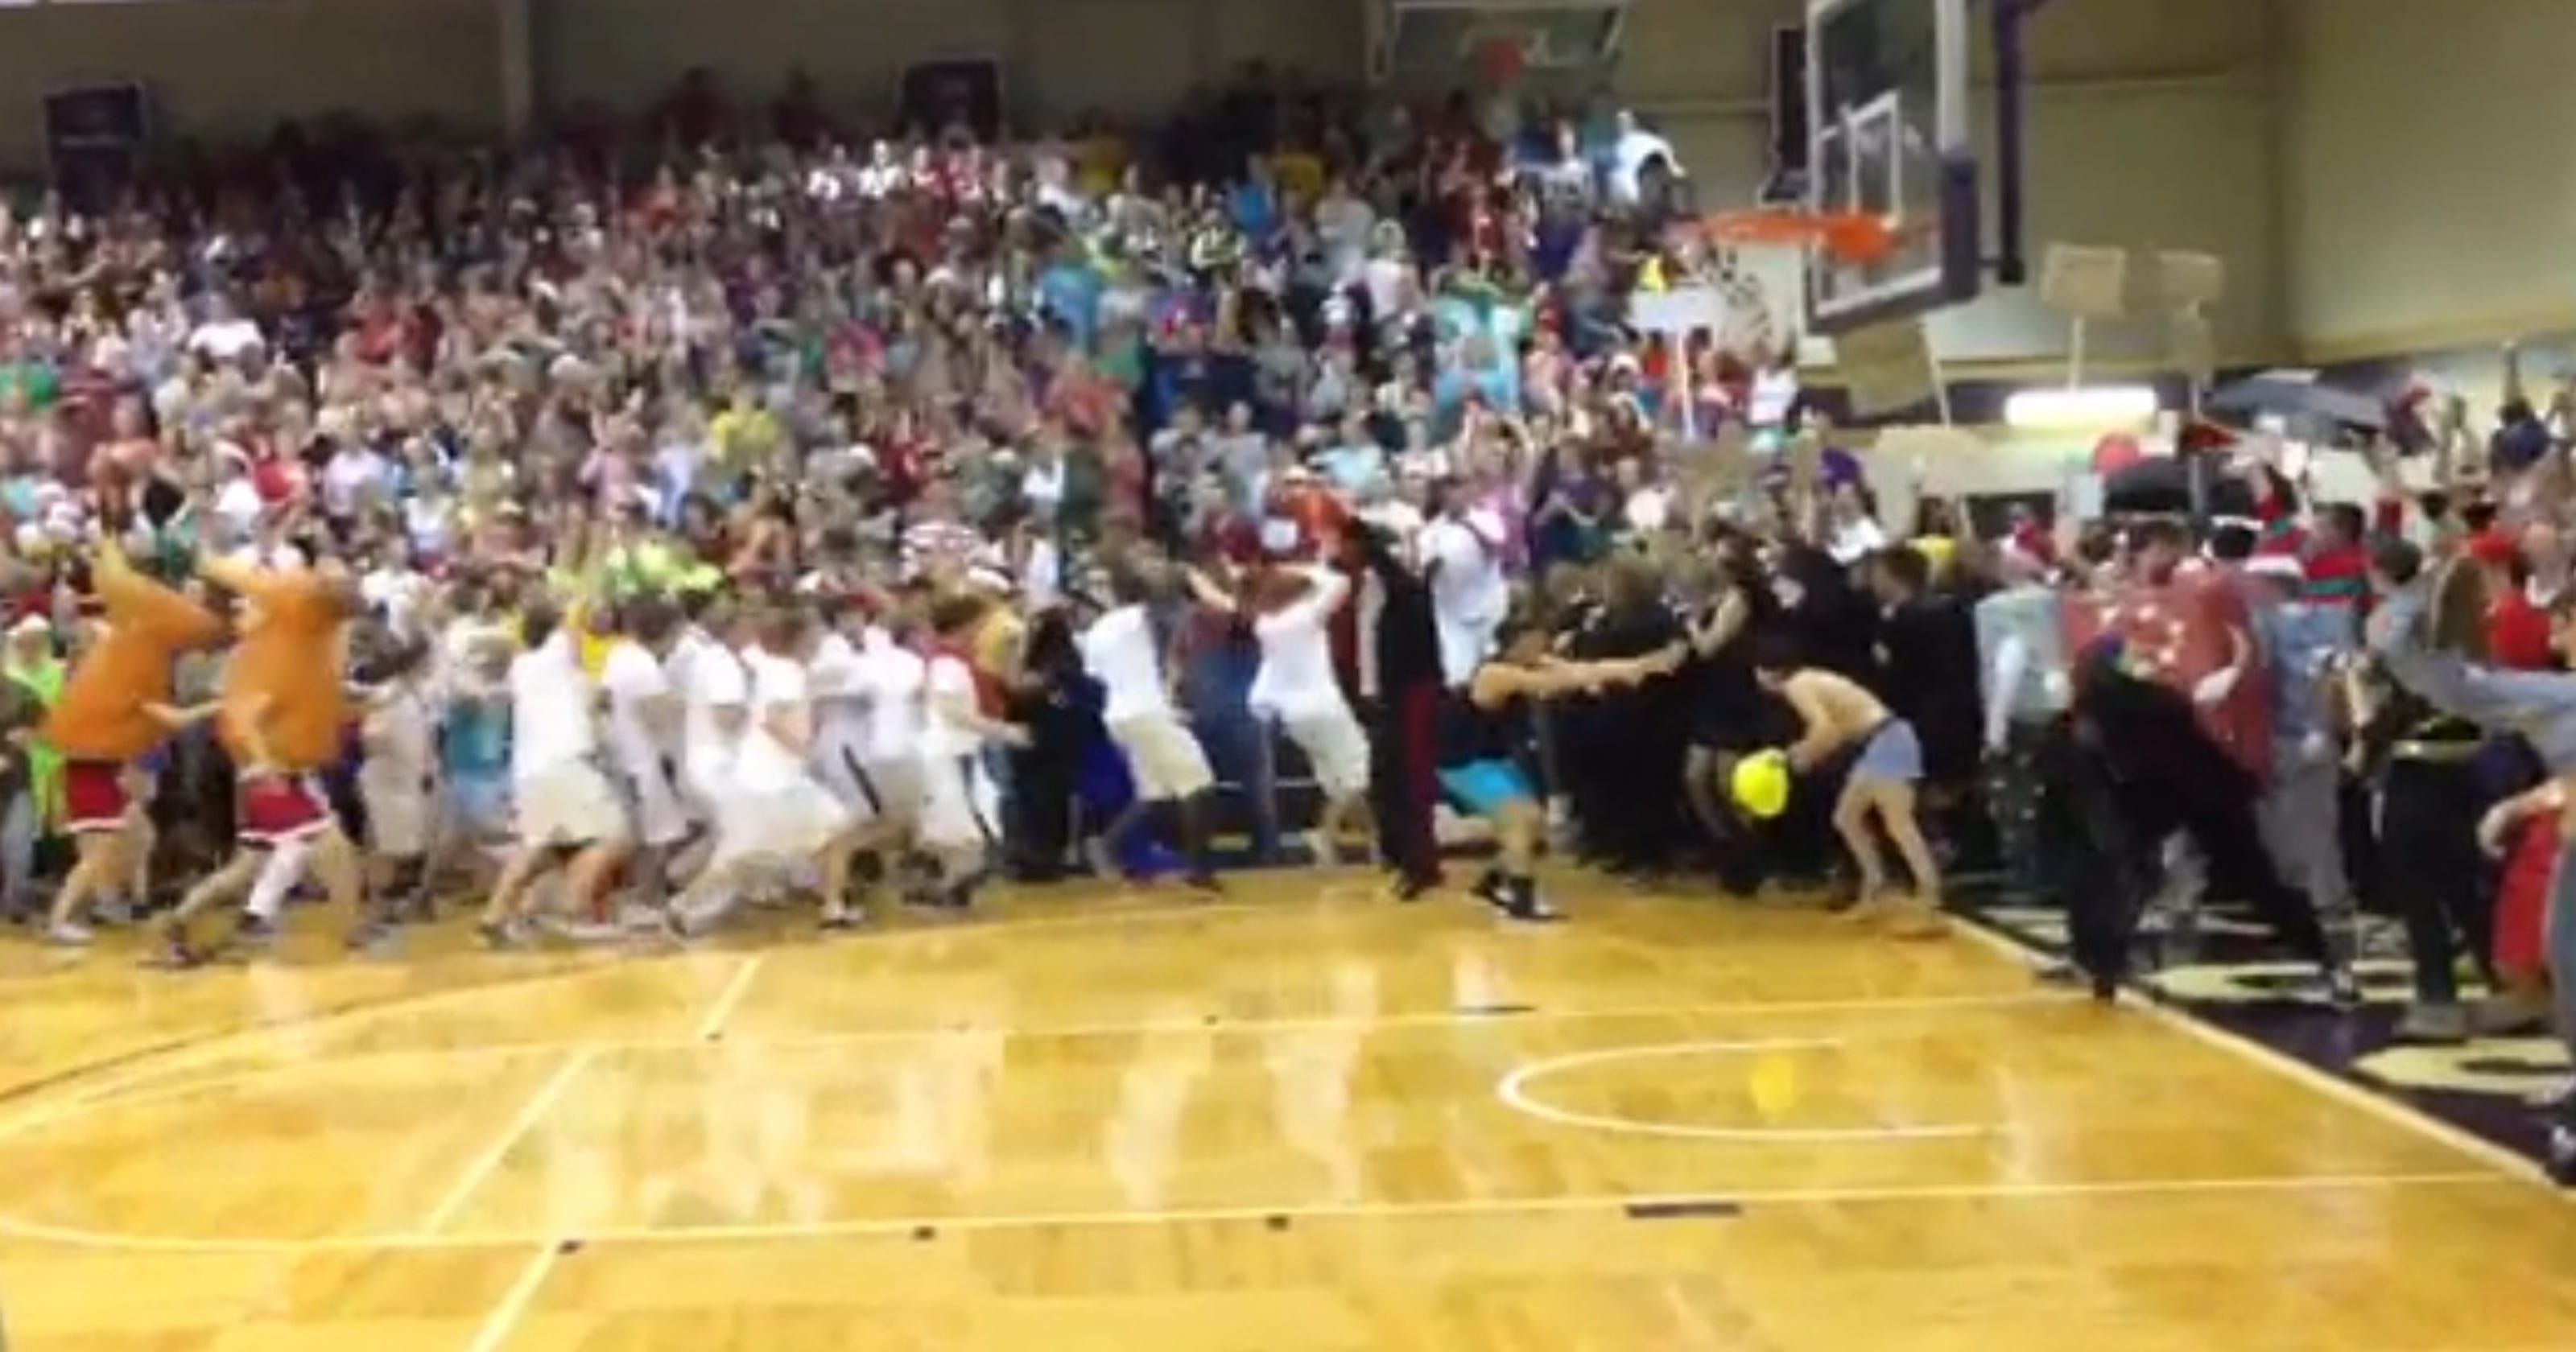 Taylor University's 'Silent Night' game is tremendous (VIDEO)